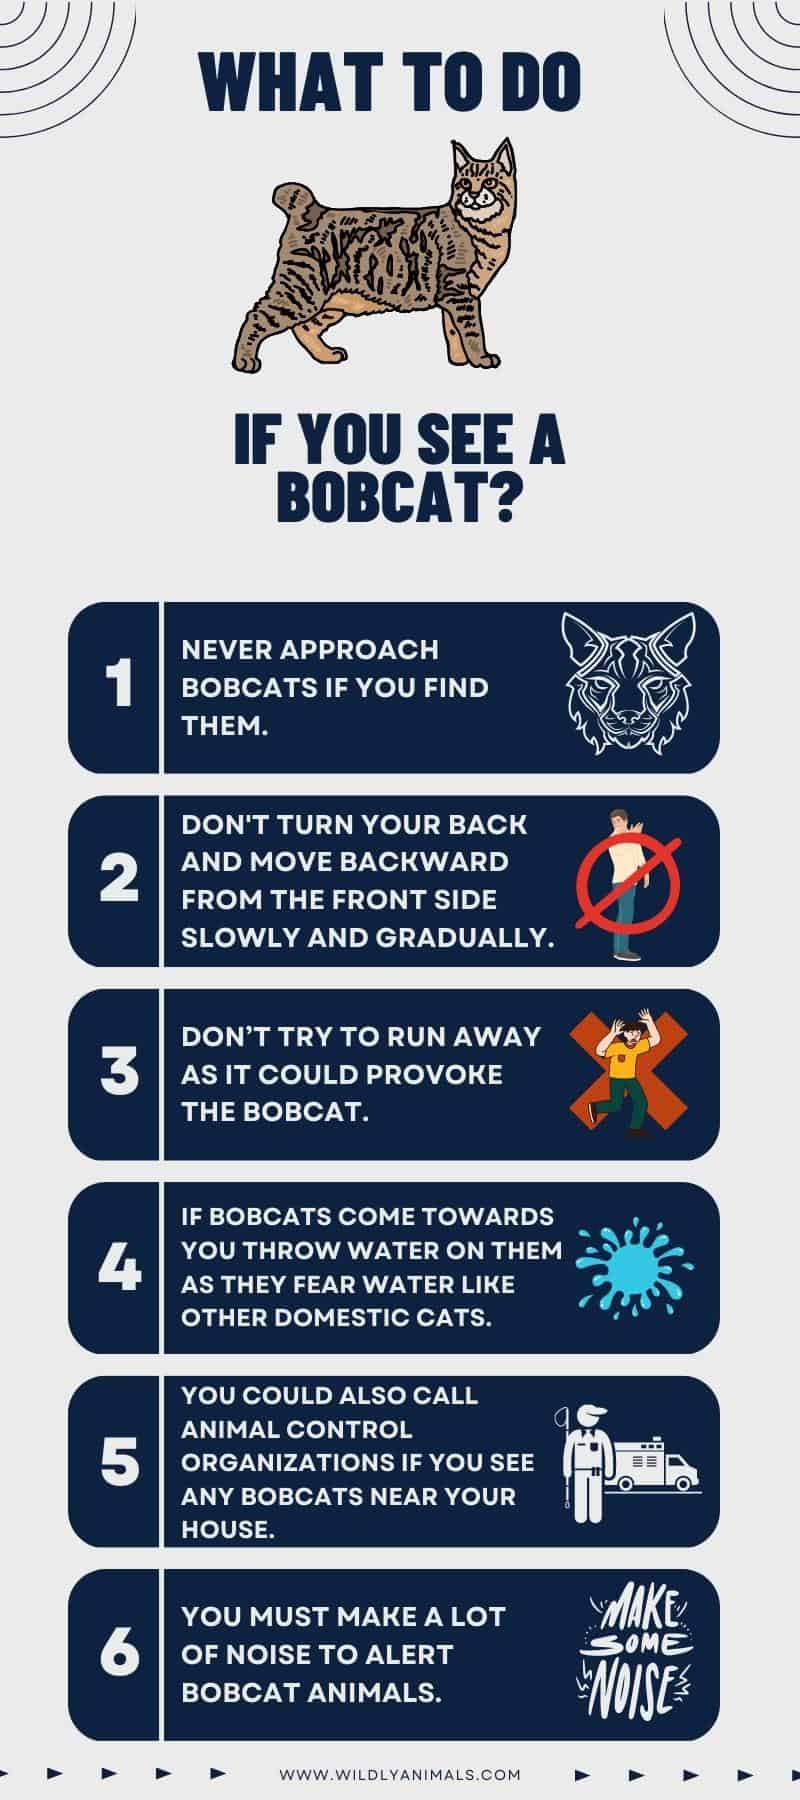 What to do if you see a bobcat - infographic